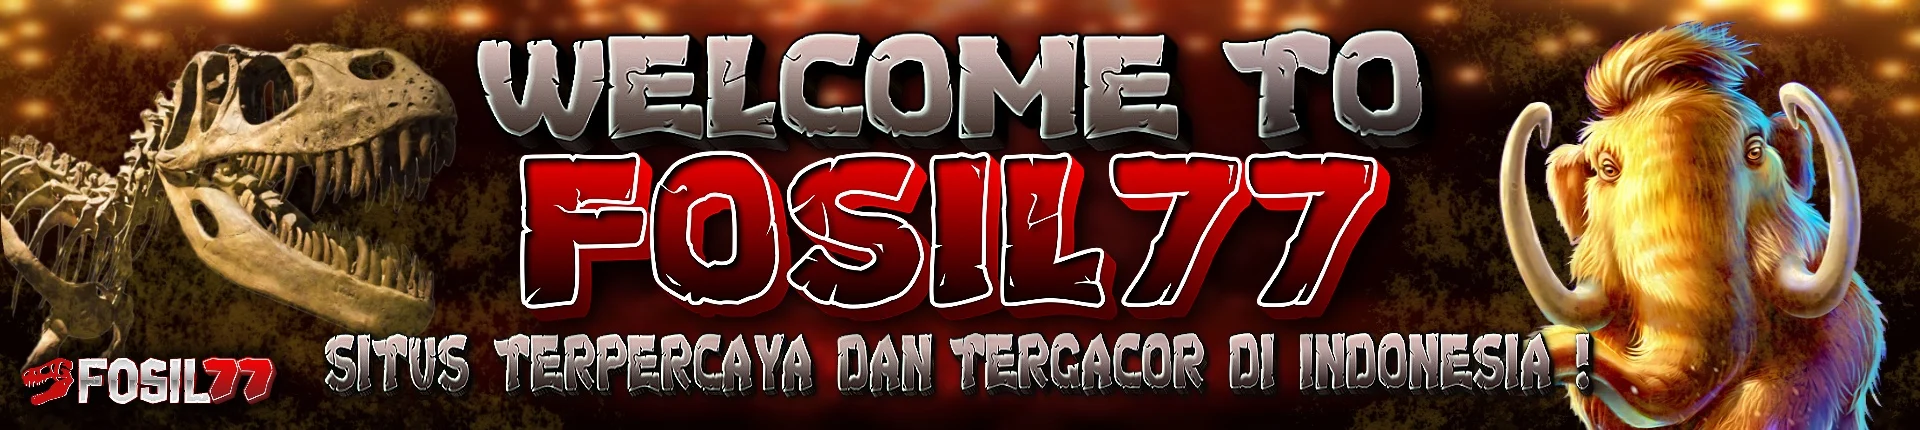 Banner Welcome Fosil77